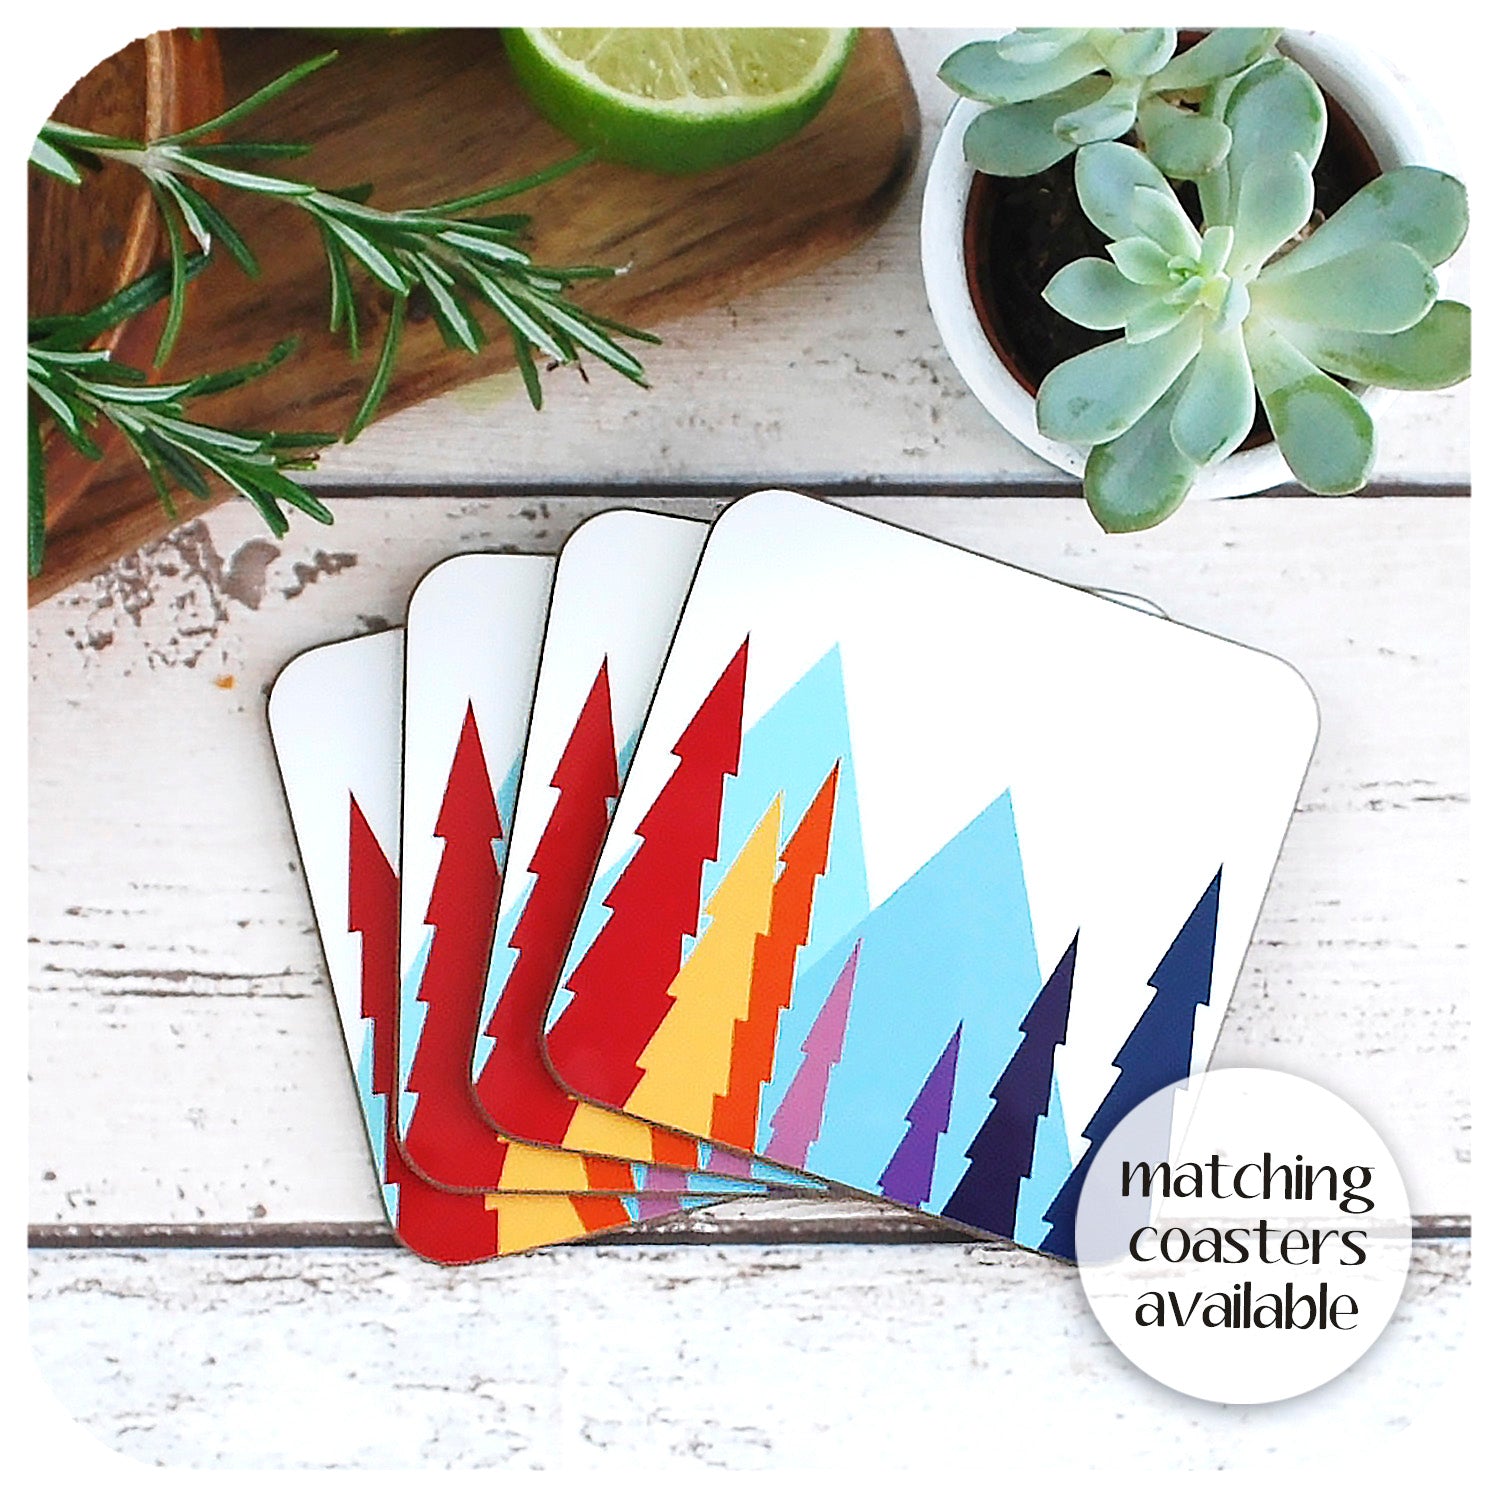 Matching Nordic Trees Coasters available | The Inkabilly Emporium